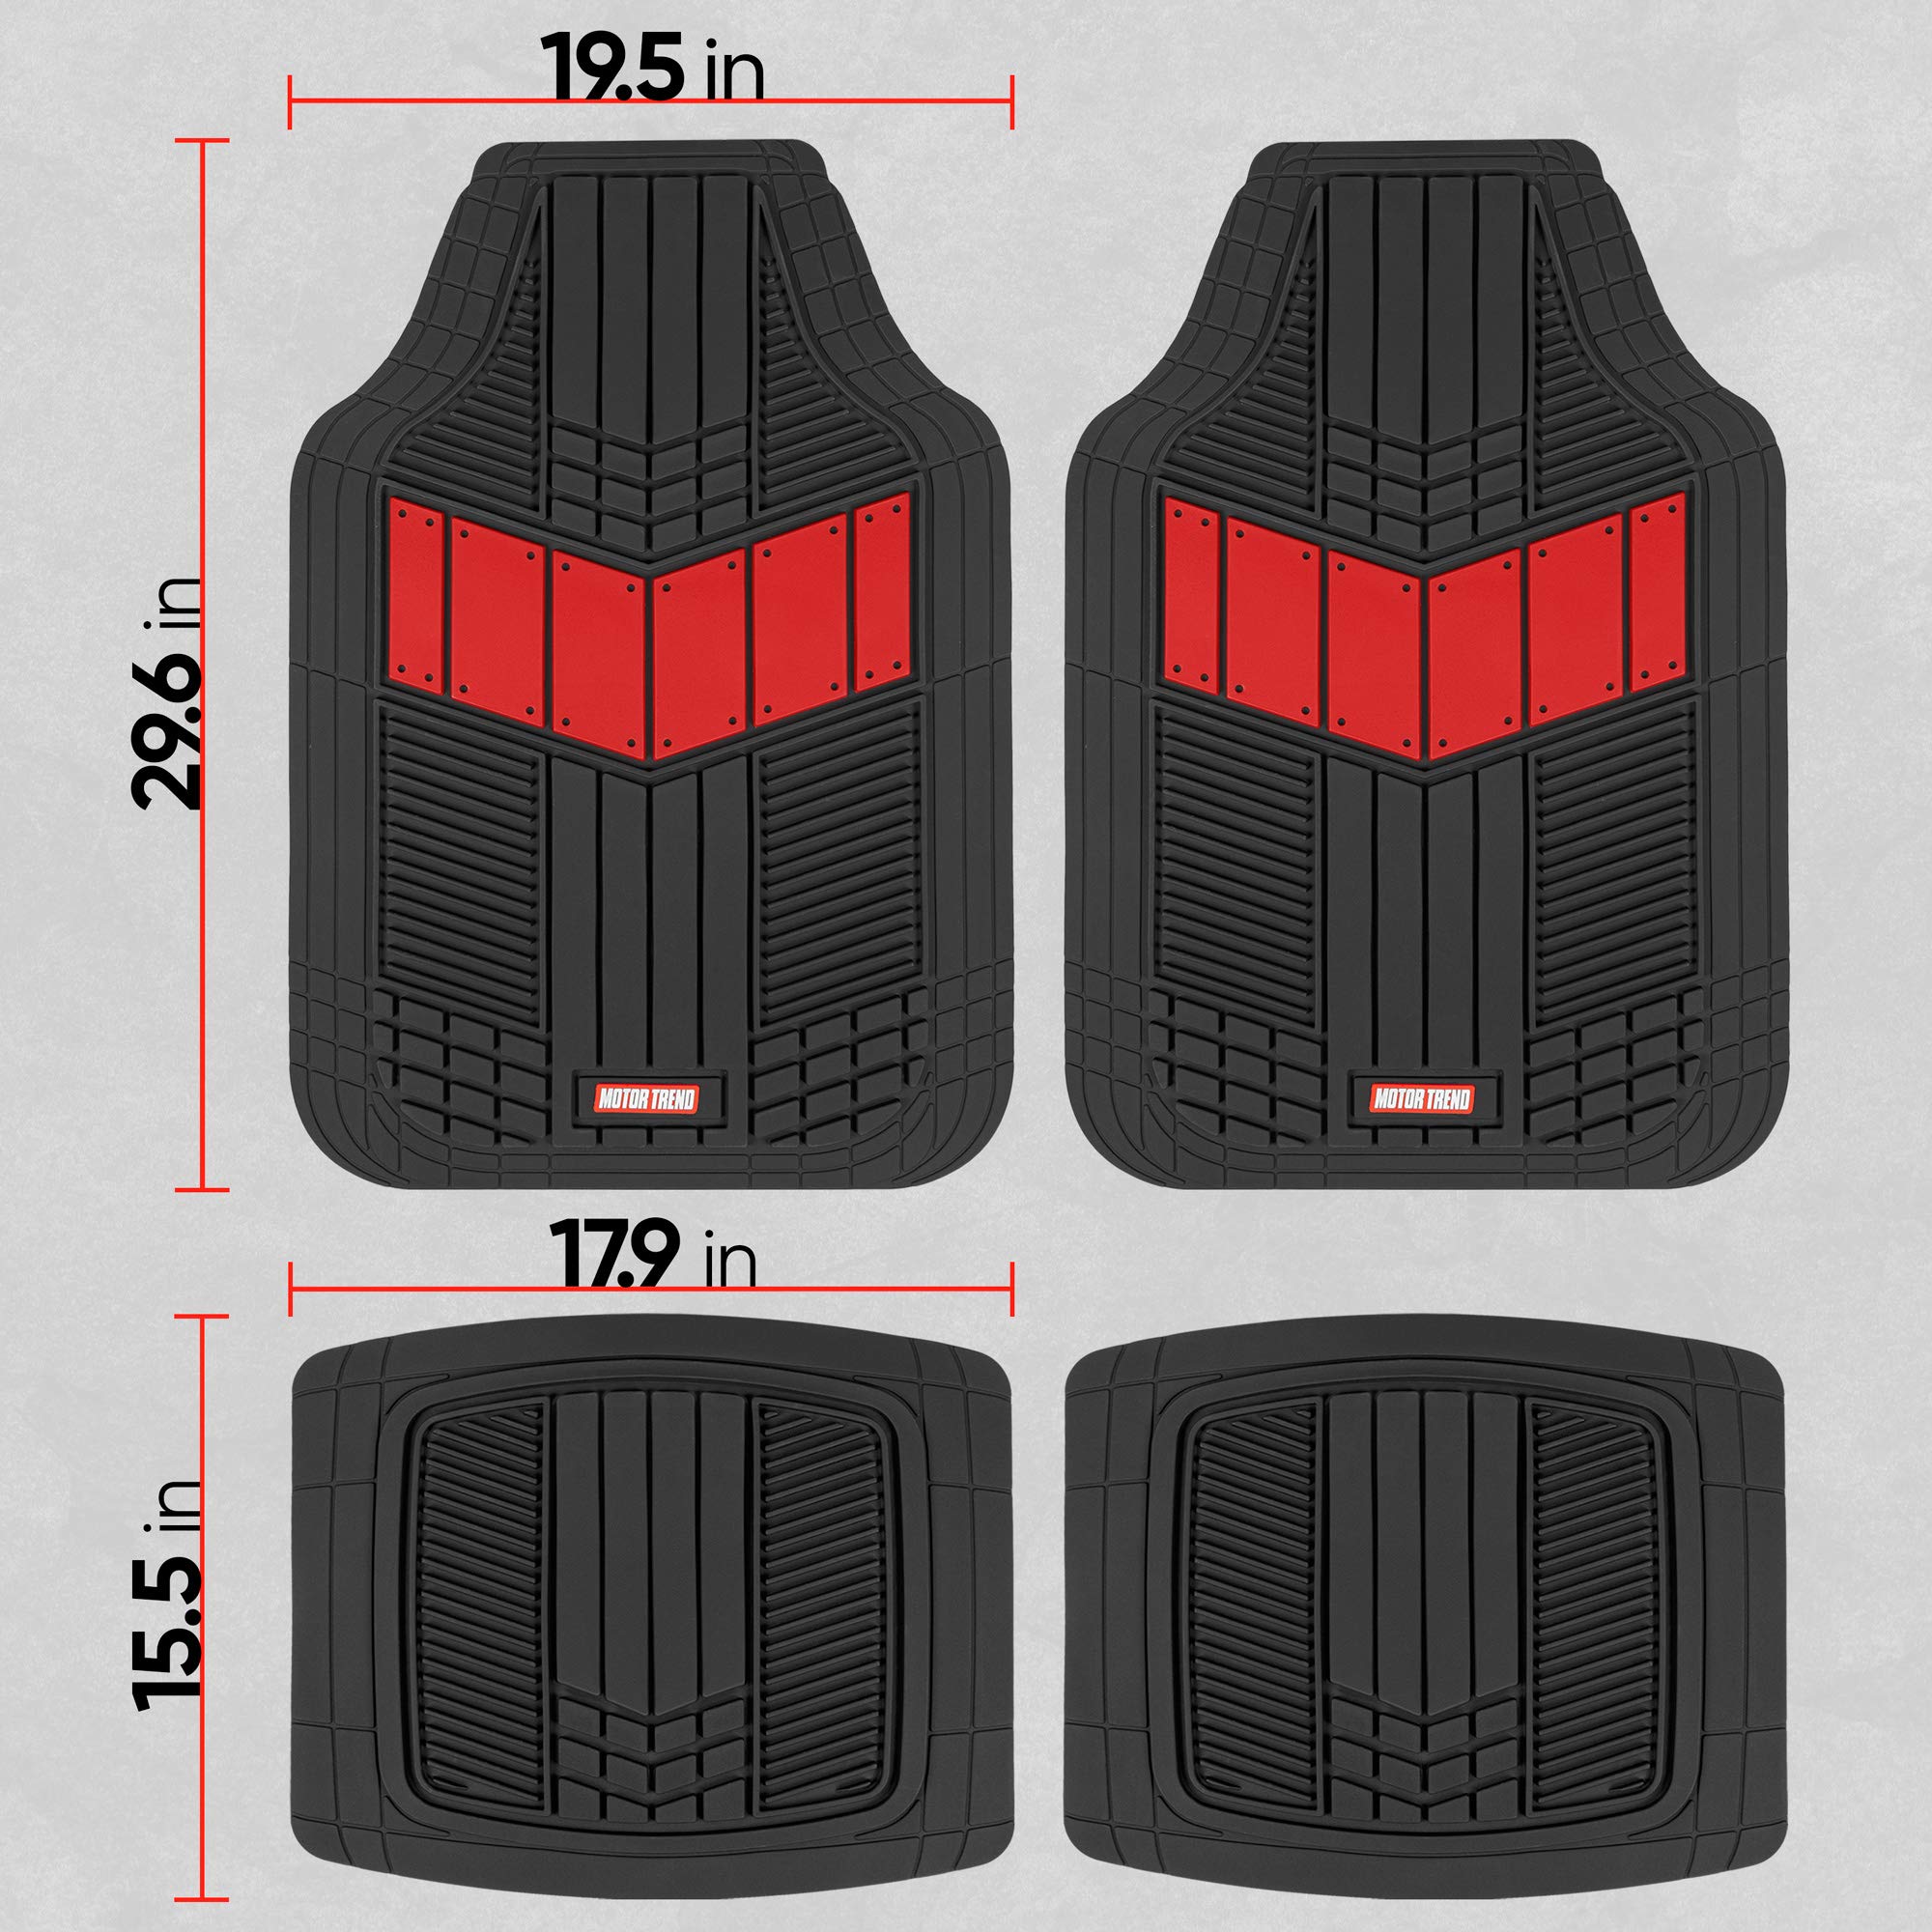 Motor Trend DualFlex Two-Tone Sport Design All-Weather Rubber Floor Mats for Car, Truck, Van & SUV - Waterproof Front & Rear Liners with Drainage Channels, Red